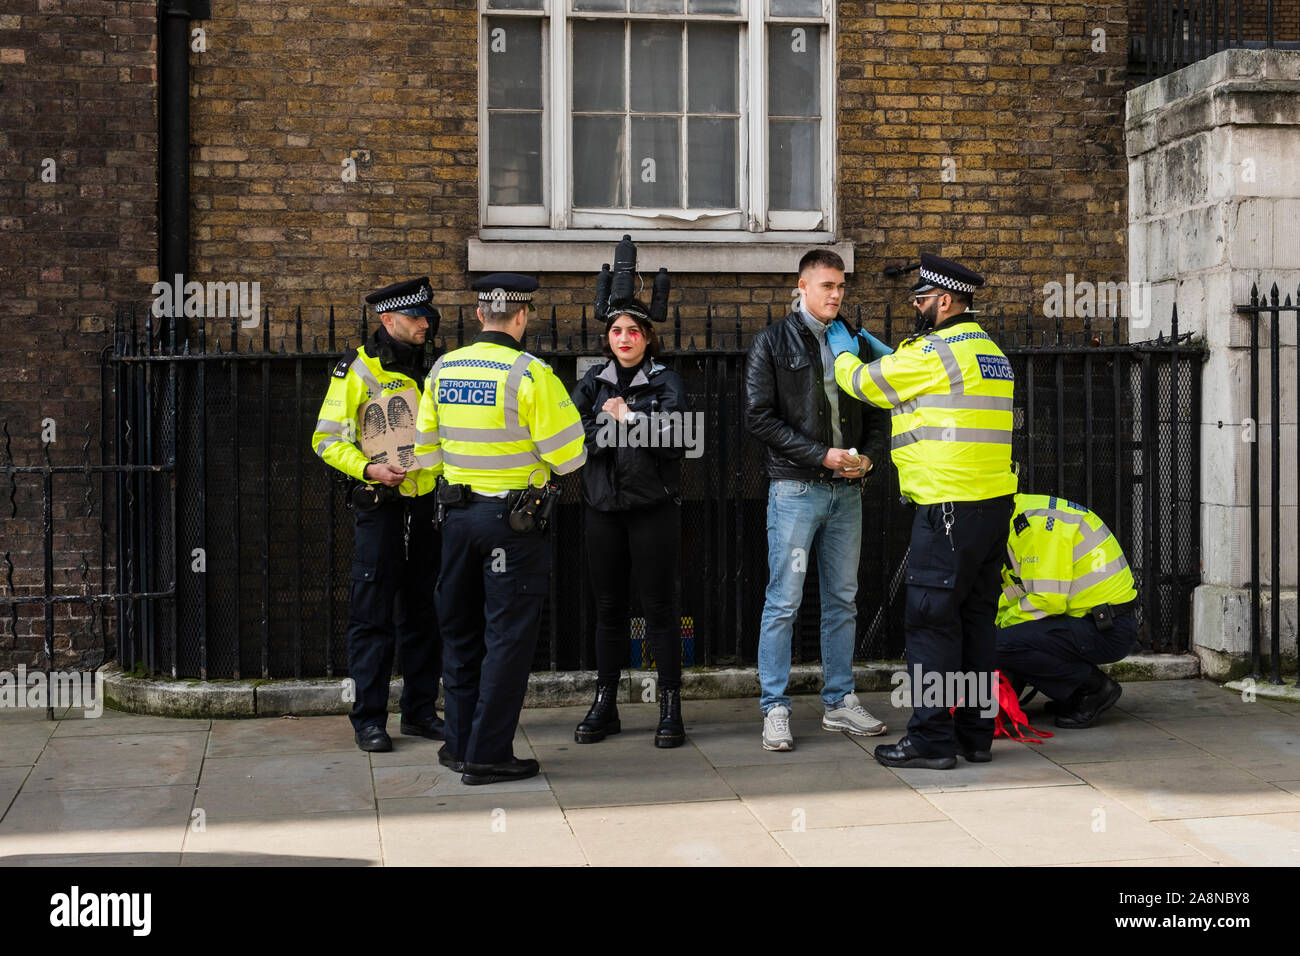 Metropolitan police officers carrying out their duties during the Extinction Rebellion protest in Central London, England, U.K. Stock Photo